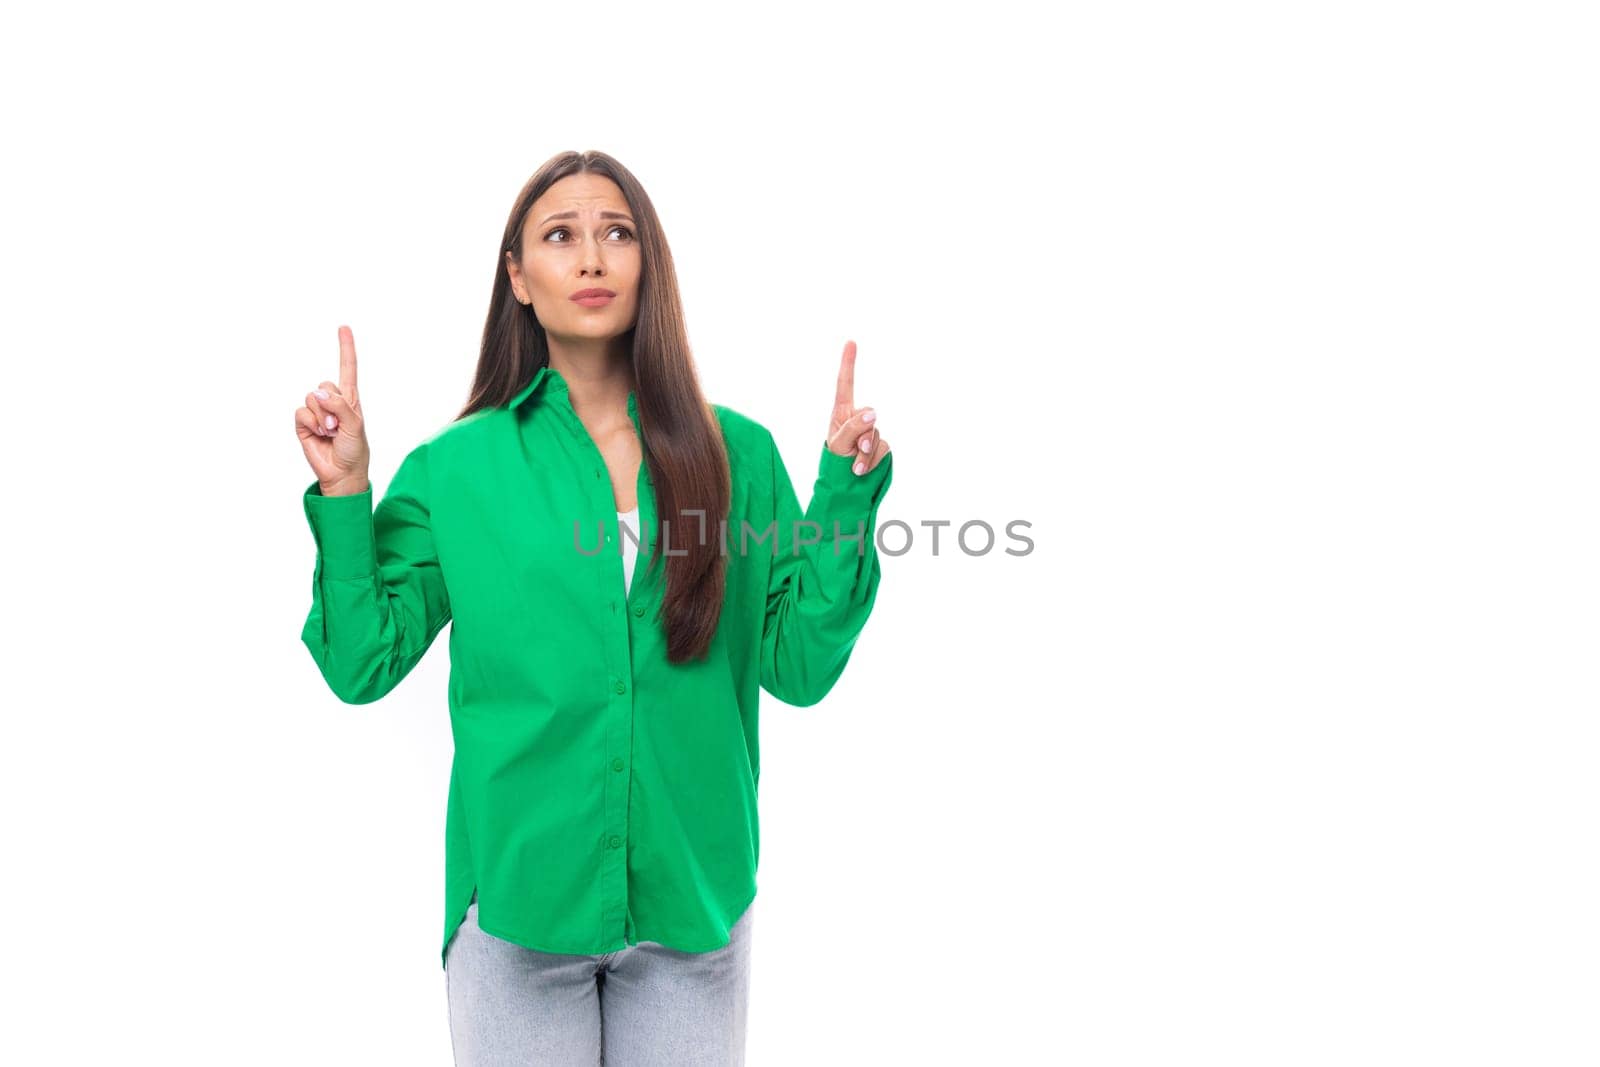 young caucasian brunette lady with make-up dressed in an elegant green shirt points with her hands towards the wall with empty space.